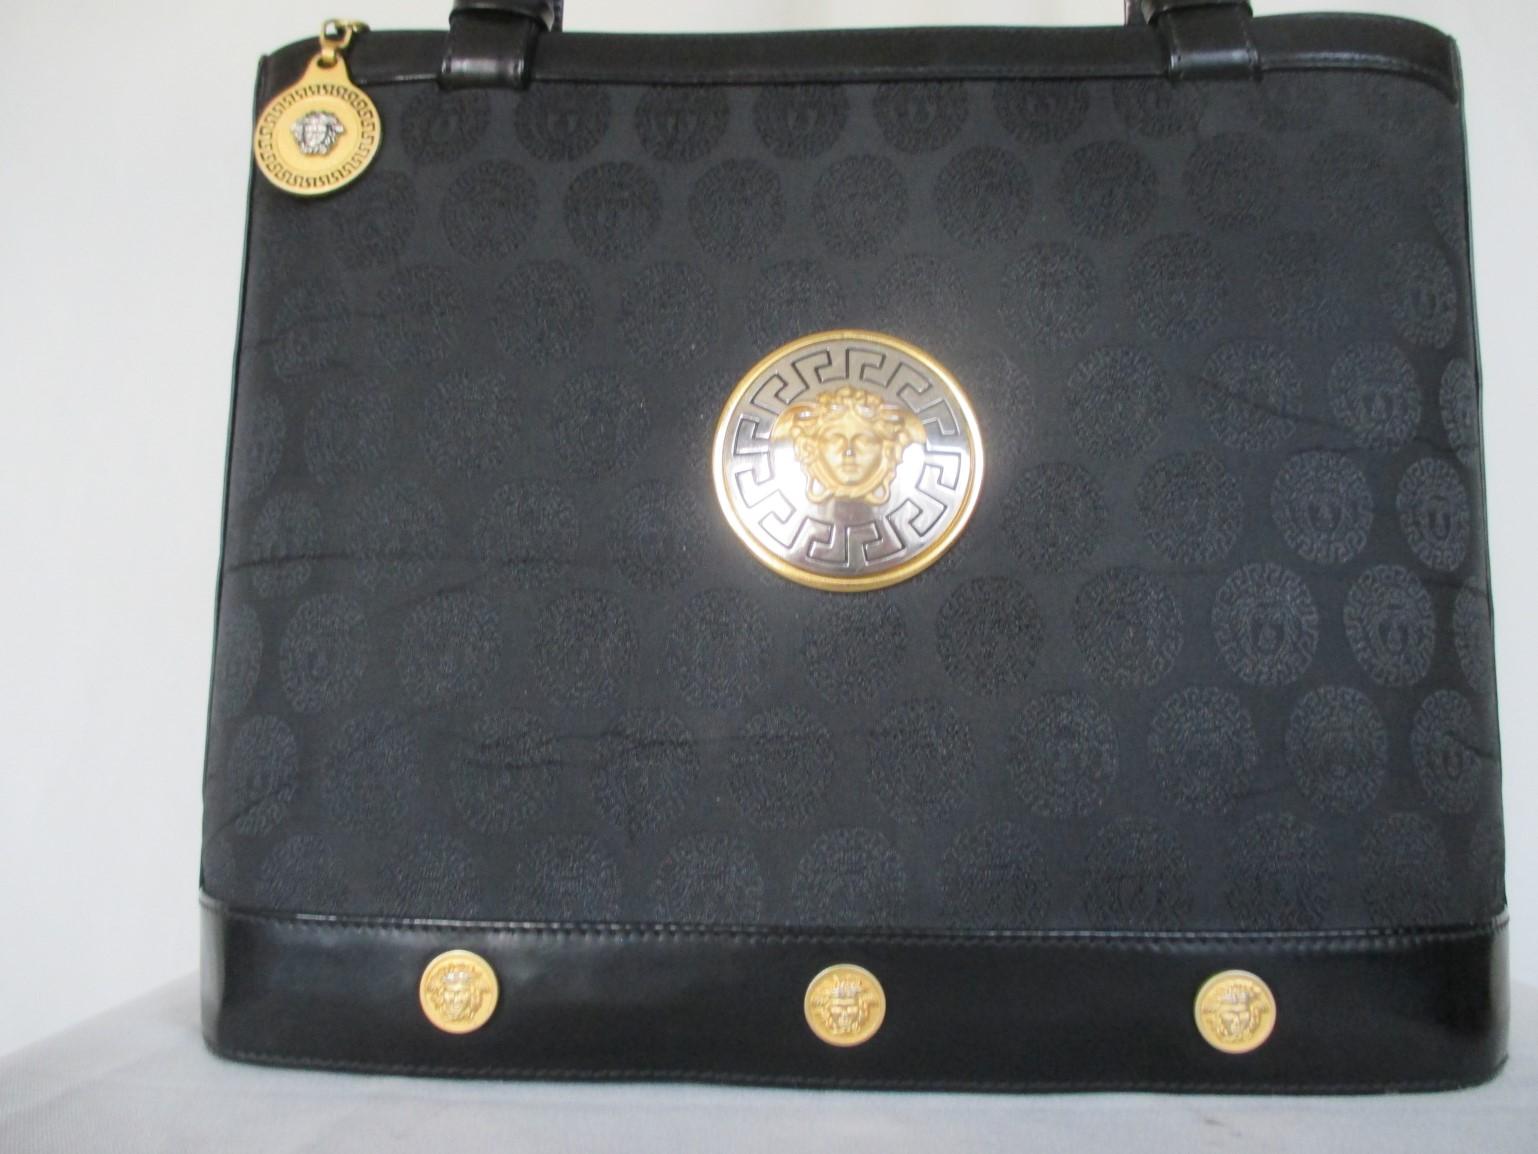 This vintage Versace bag is made with gold hardware medusa, is very light to wear and closes with a zipper.
Logo lined interior
Color: black
Pre-loved condition
Inside with a zipper pocket.
Sizes:  32 cm/12.59 inch x 25 cm/ 9.84 inch x 10 cm/3.93